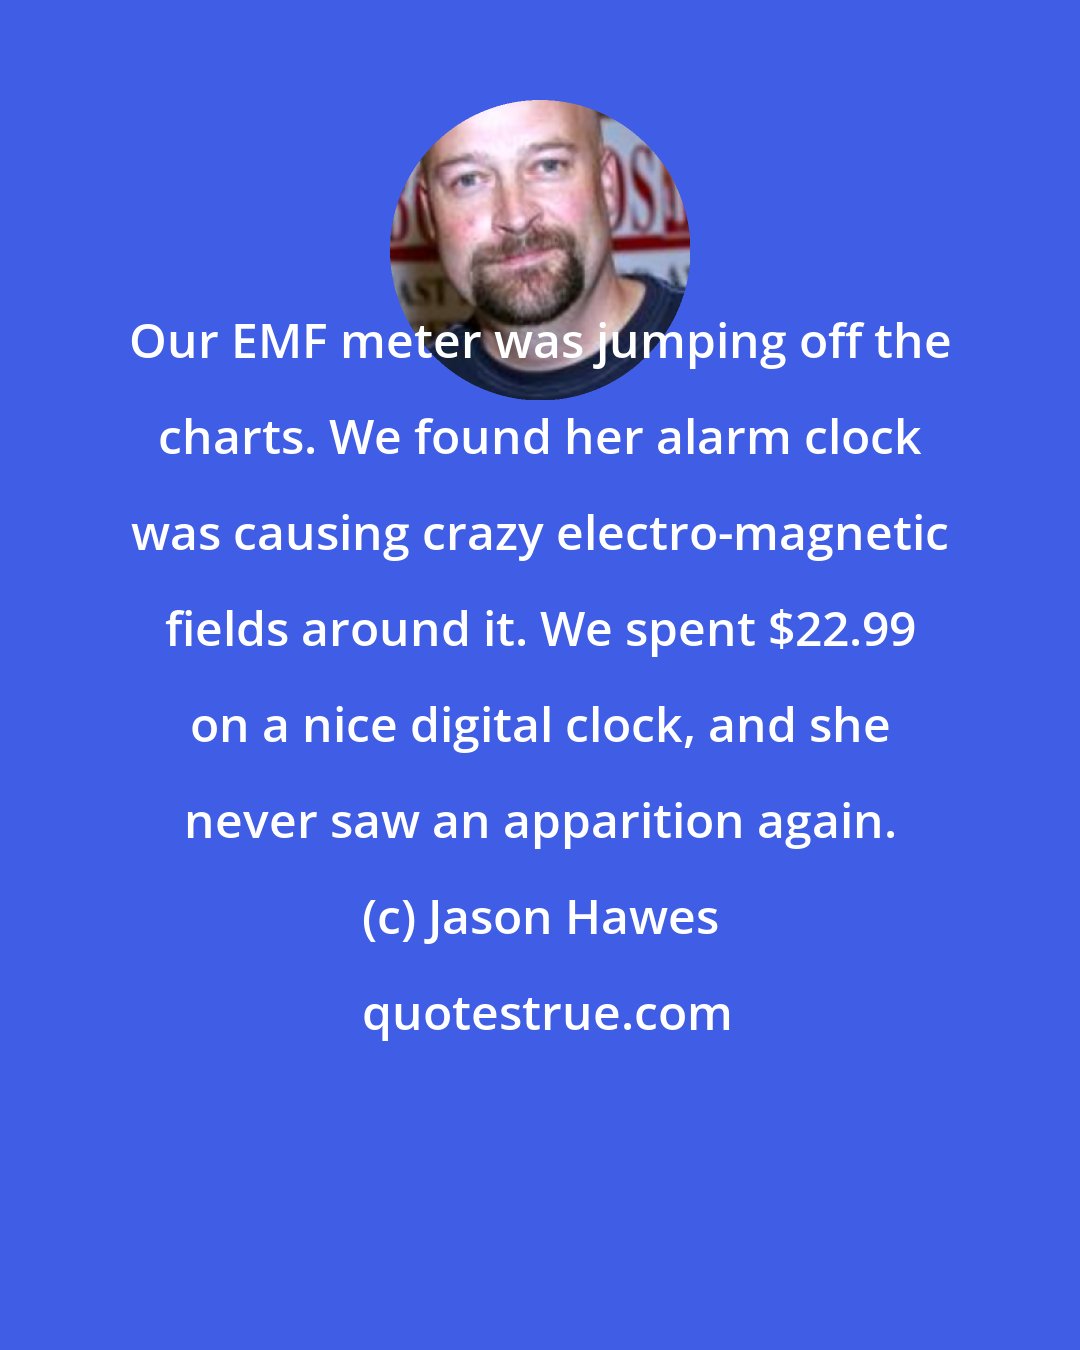 Jason Hawes: Our EMF meter was jumping off the charts. We found her alarm clock was causing crazy electro-magnetic fields around it. We spent $22.99 on a nice digital clock, and she never saw an apparition again.